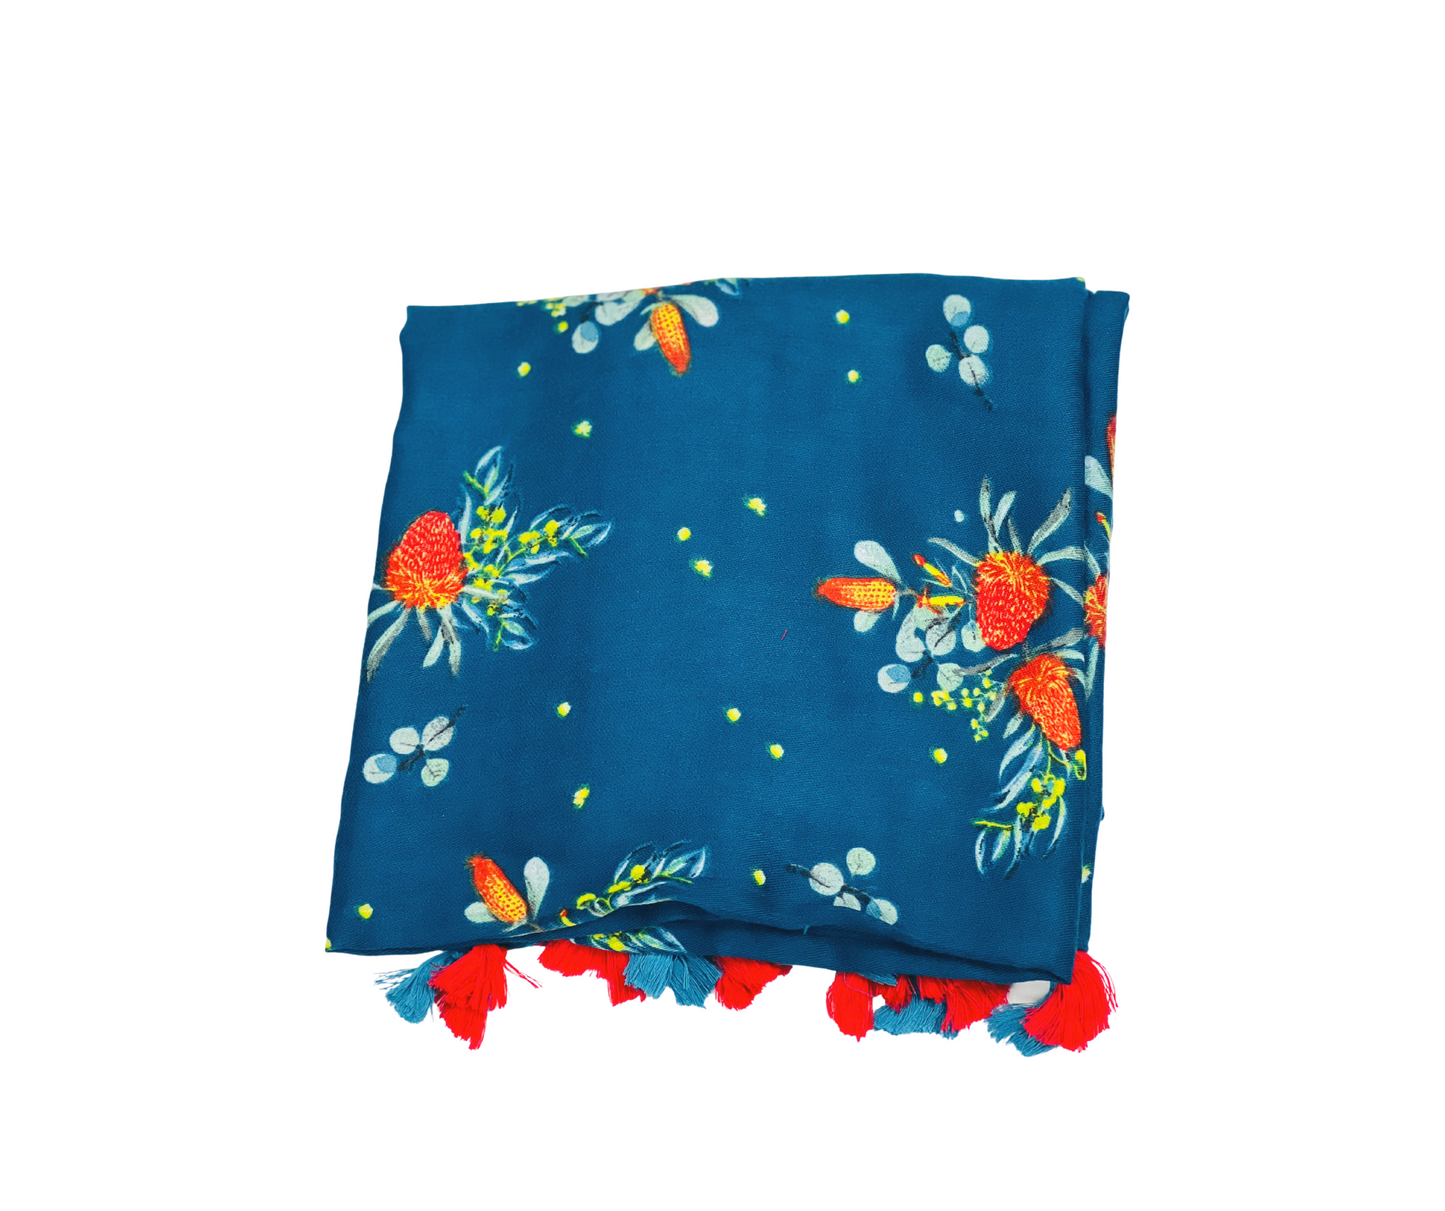 Printed Cotton / Polyester Scarf For Women